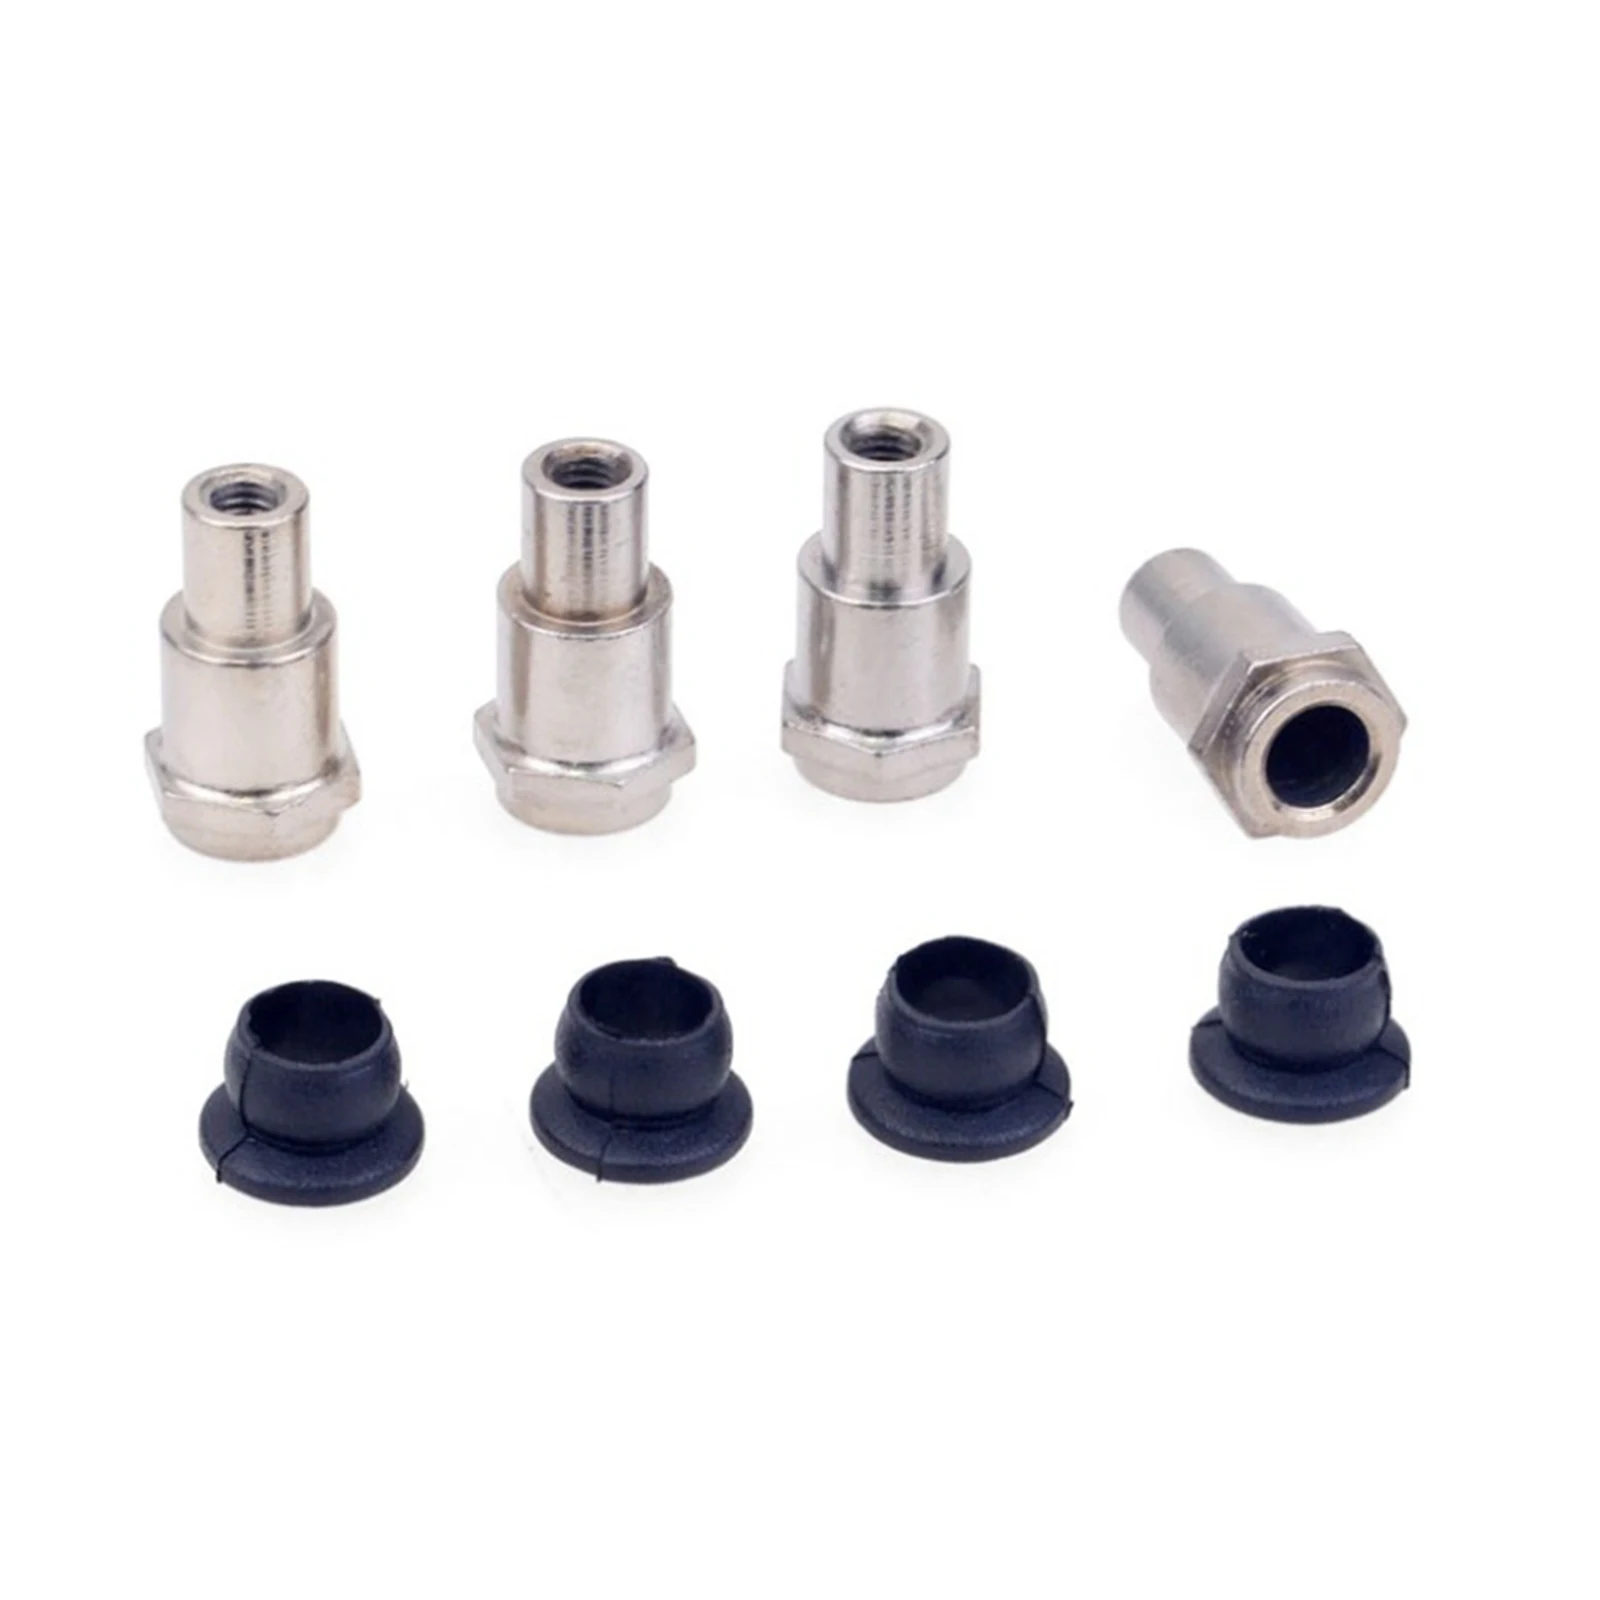 4 Pieces Metal Shock Absorber Bushing 1:8 Parts for Zd /8 RC Car